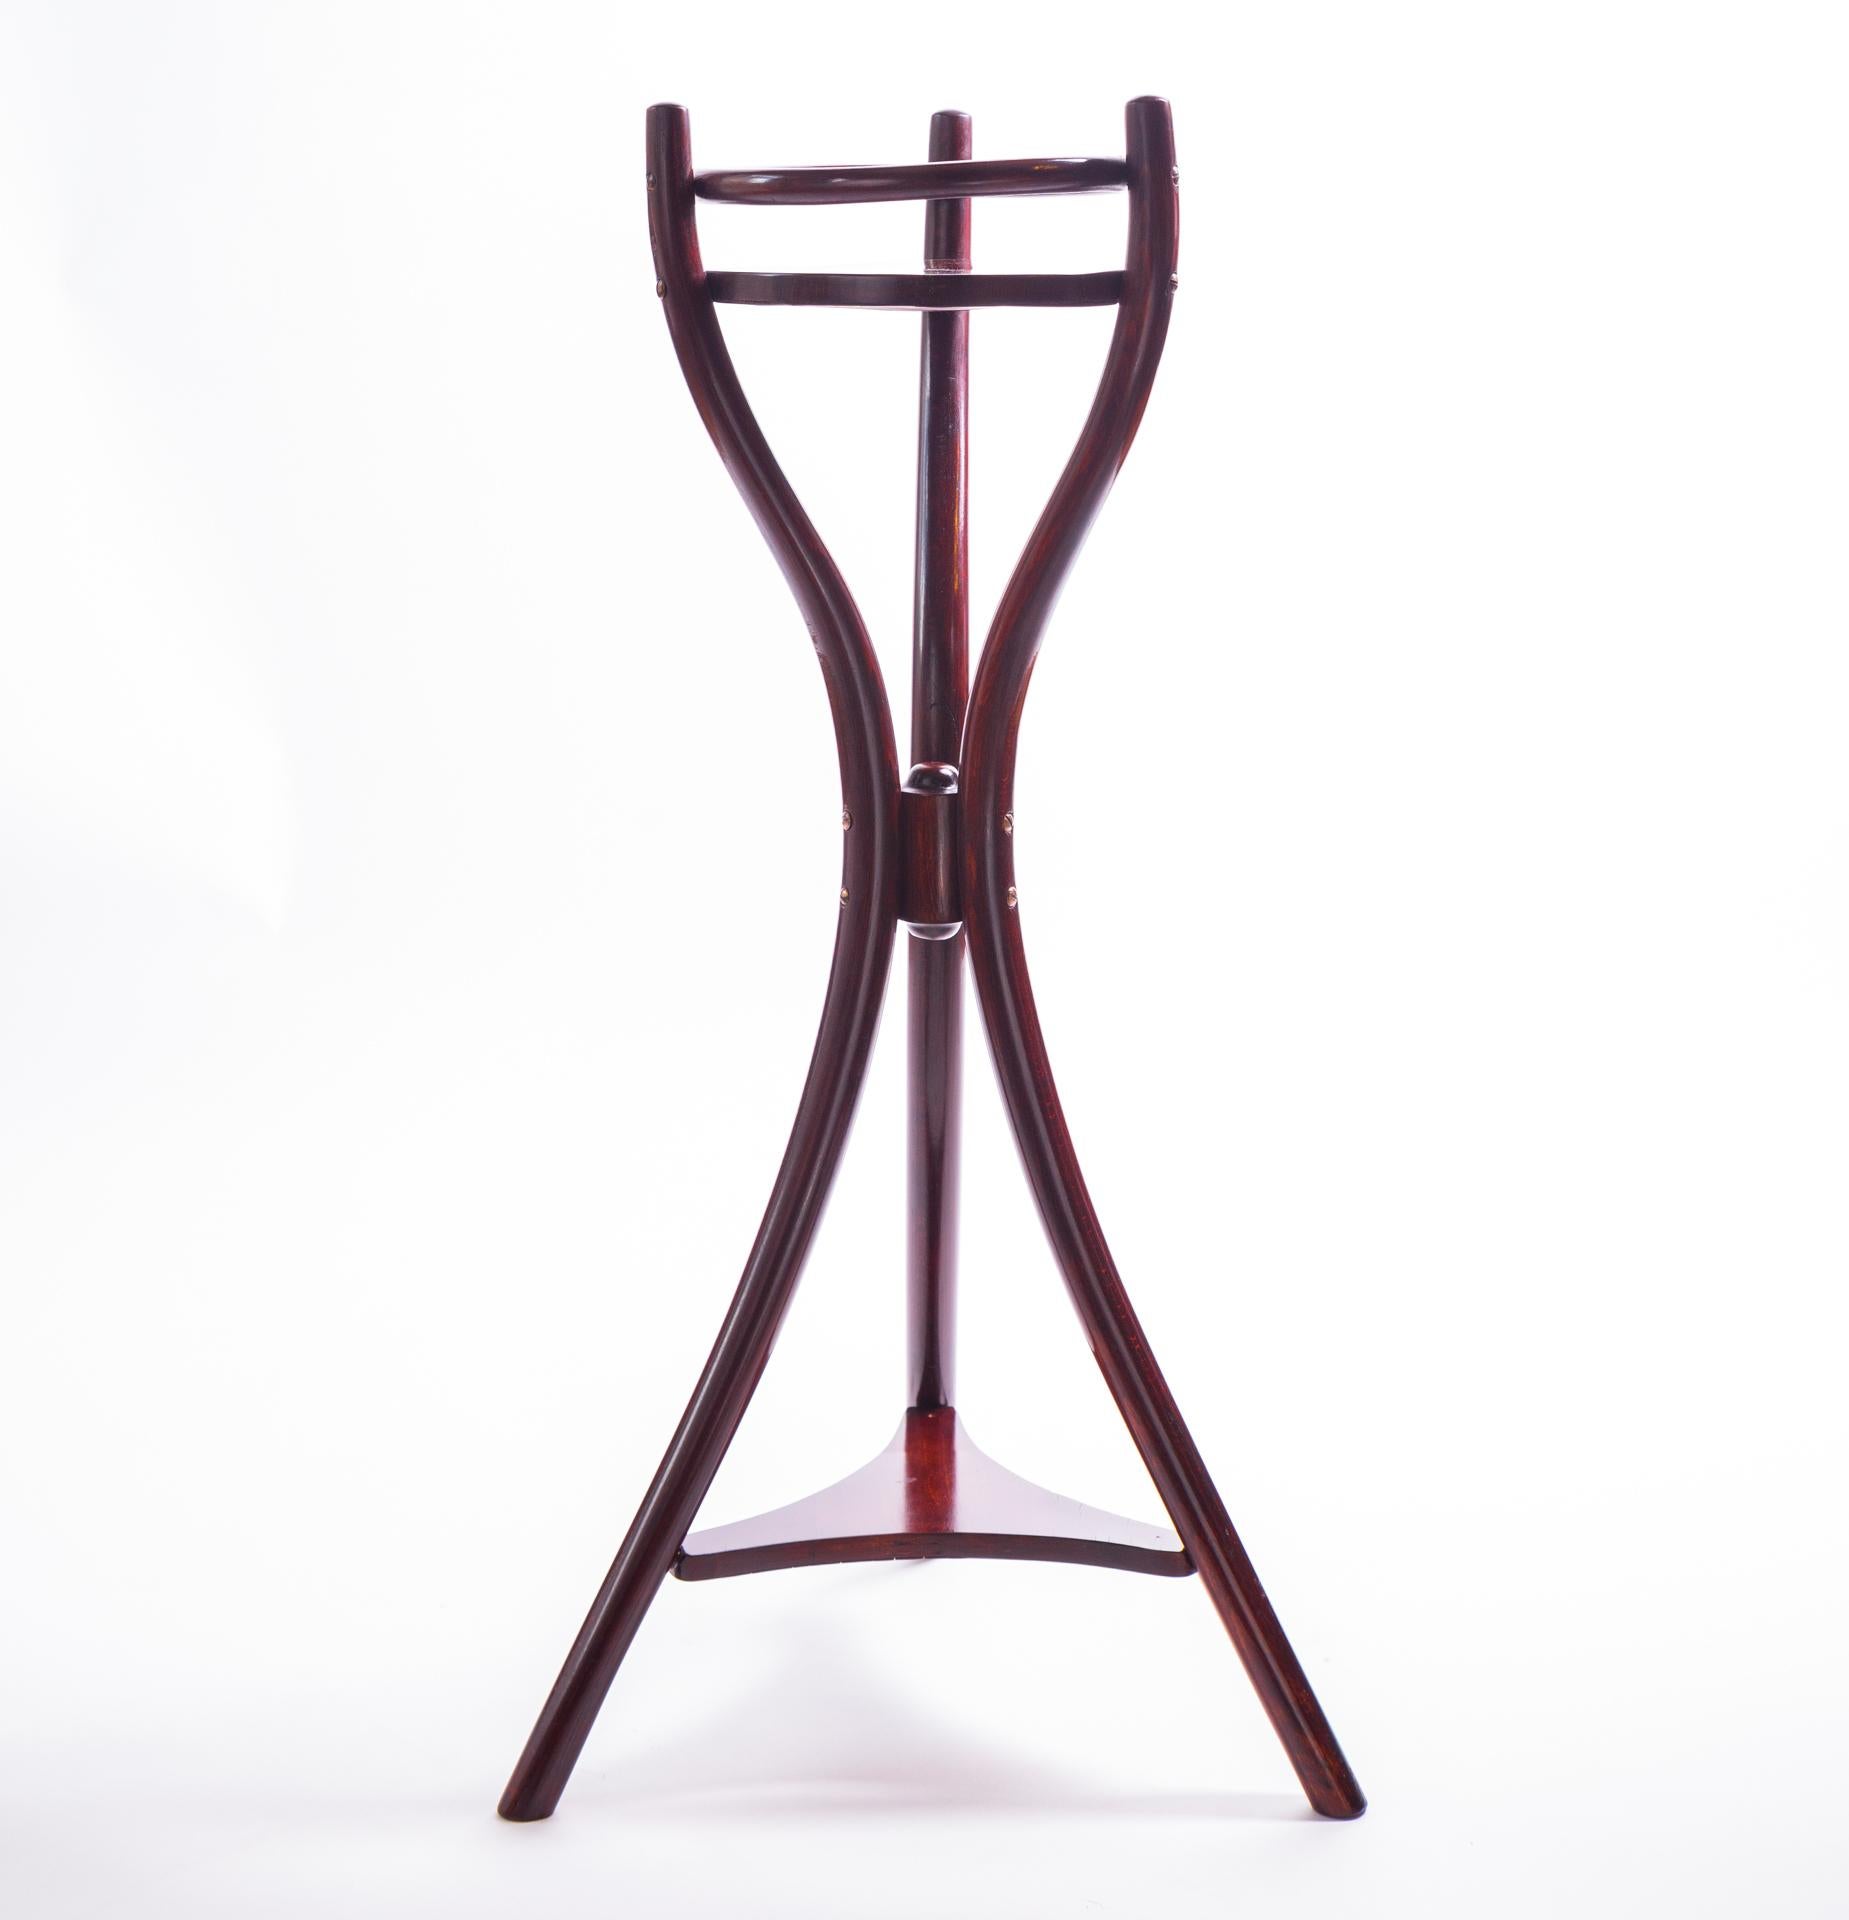 Thonet Gueridon, which is an icon of applied art of the first half of the 20th century. Object is original and signed on the bottom of the upper base. 

Stand was made in the technique patented by the outstanding designer and furniture pioneer -